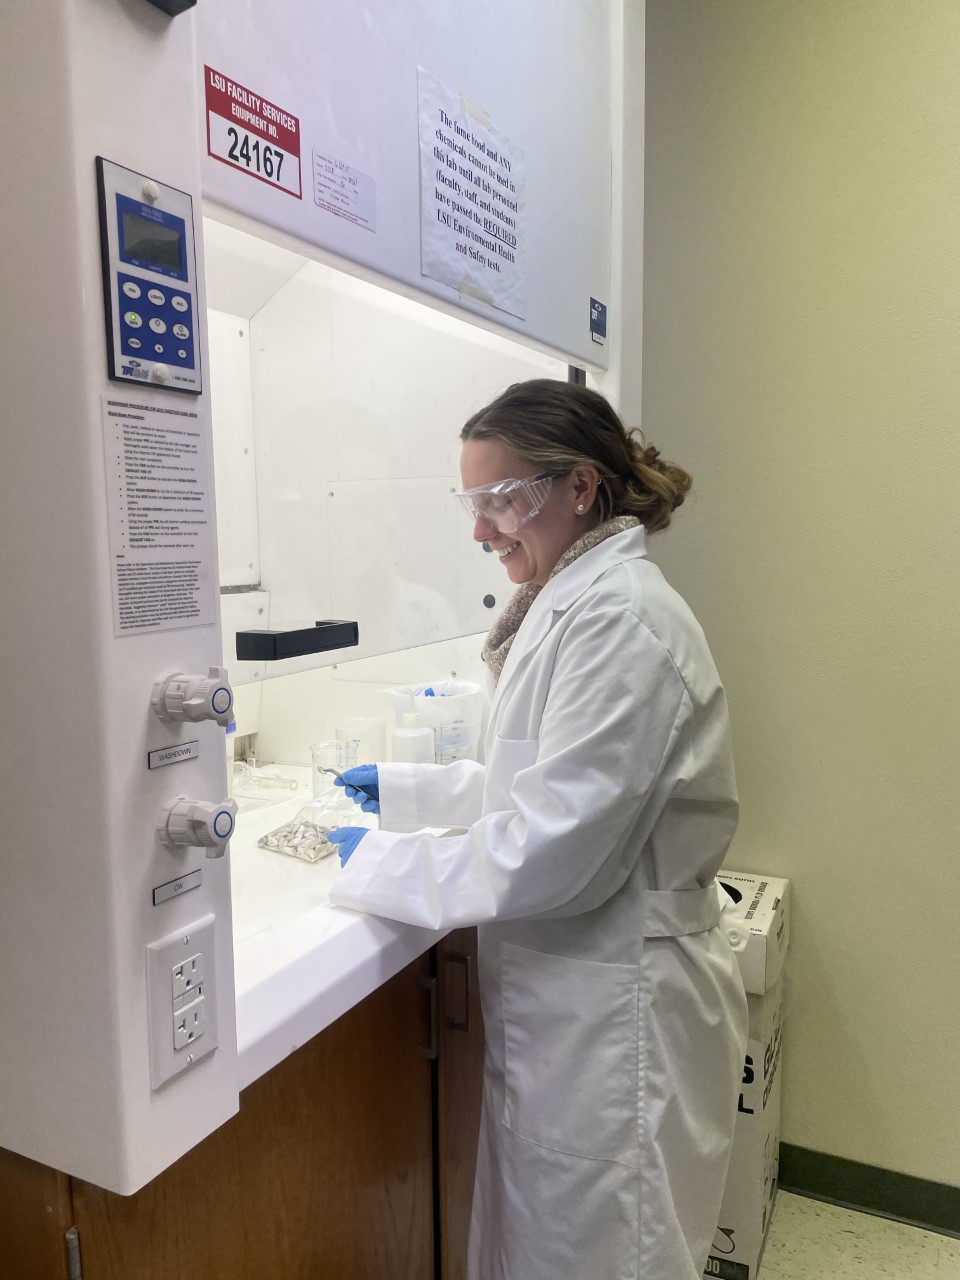 Sarah working with shells in a fume hood